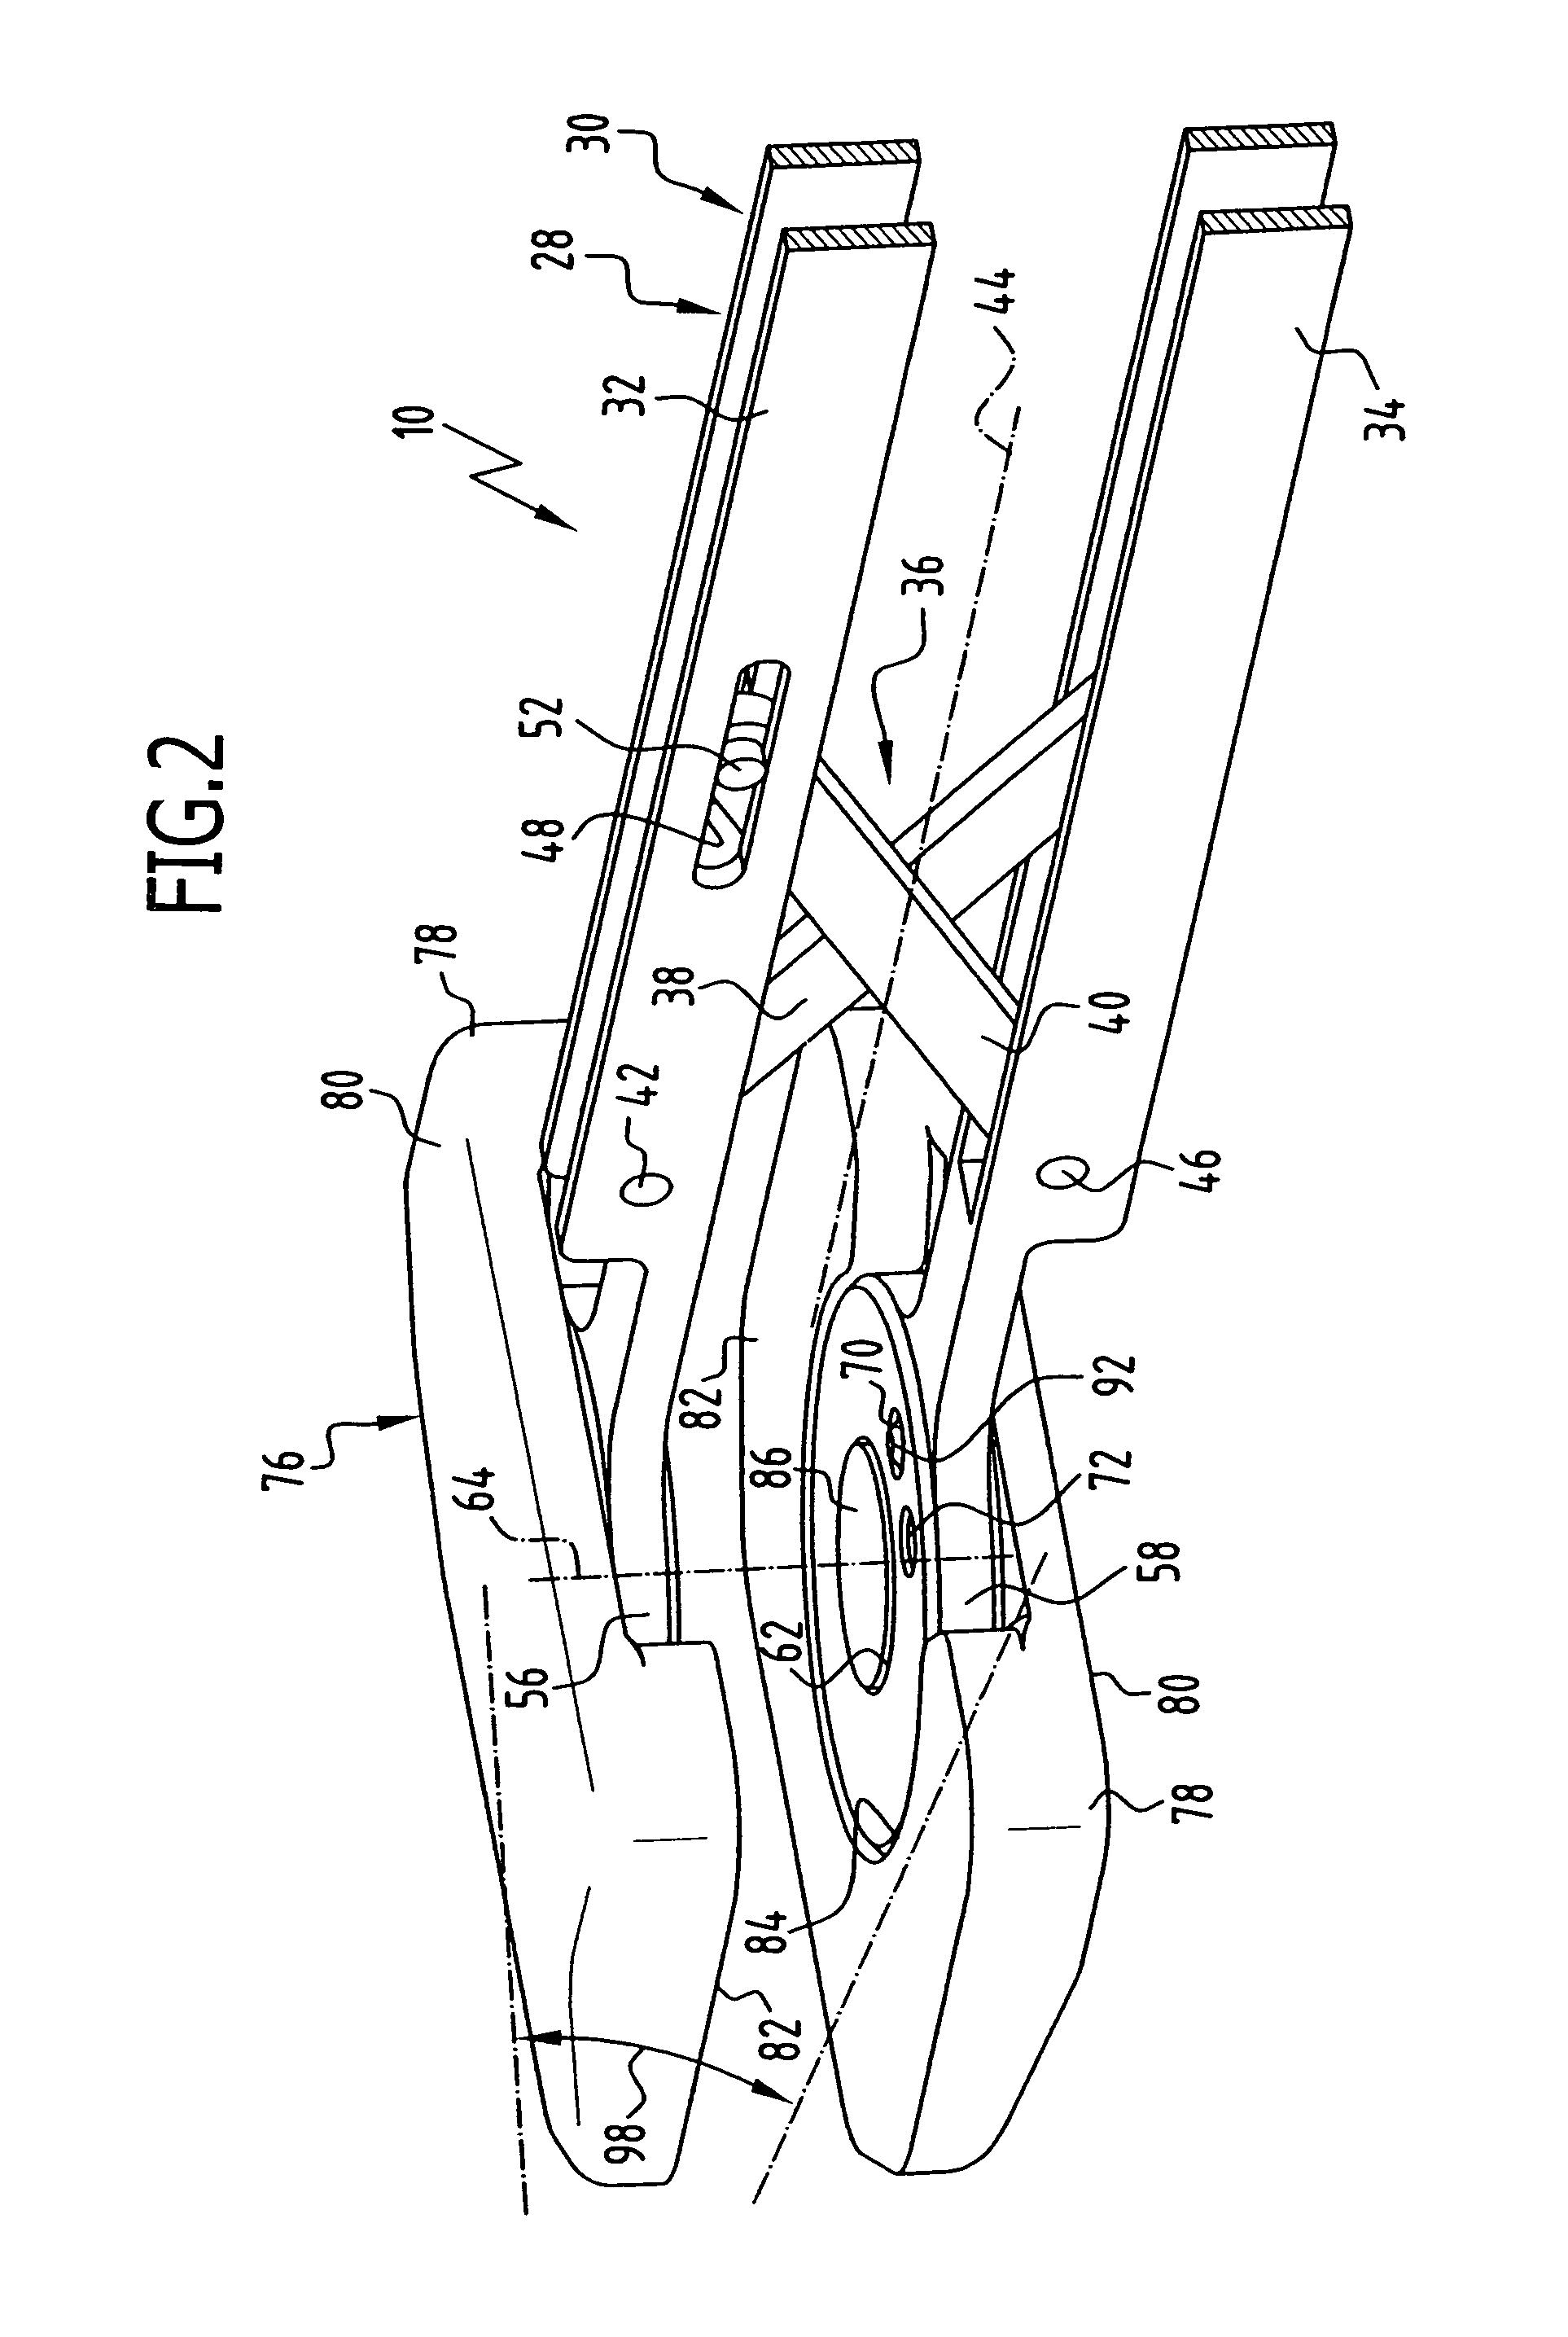 Surgical instrument for determining the size of intervertebral implant